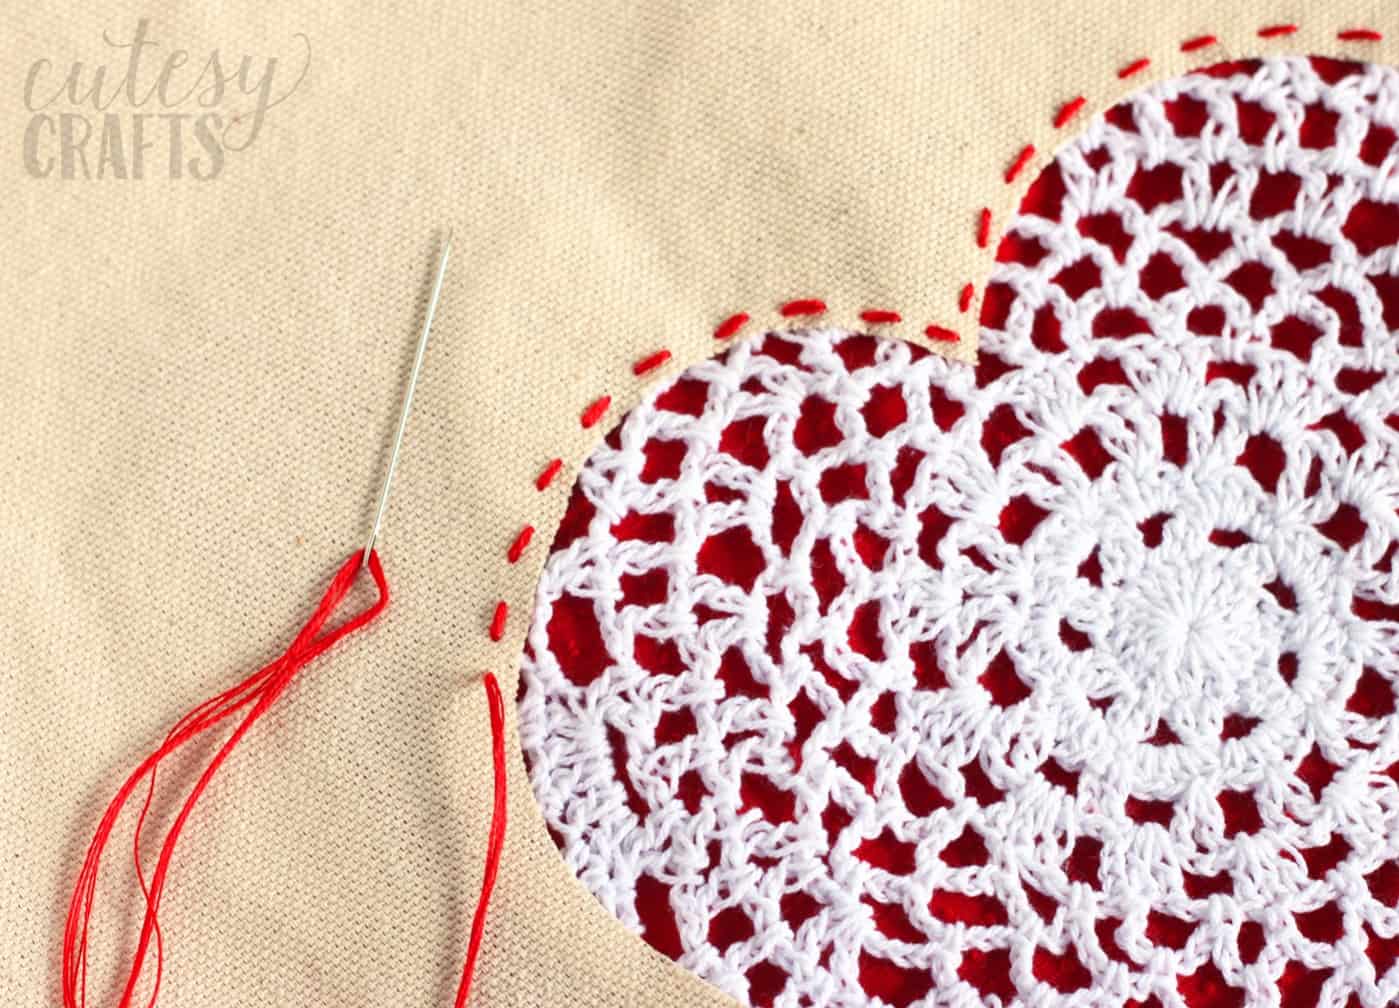 Running stitch sewn in red embroidery thread about the edge of the heart